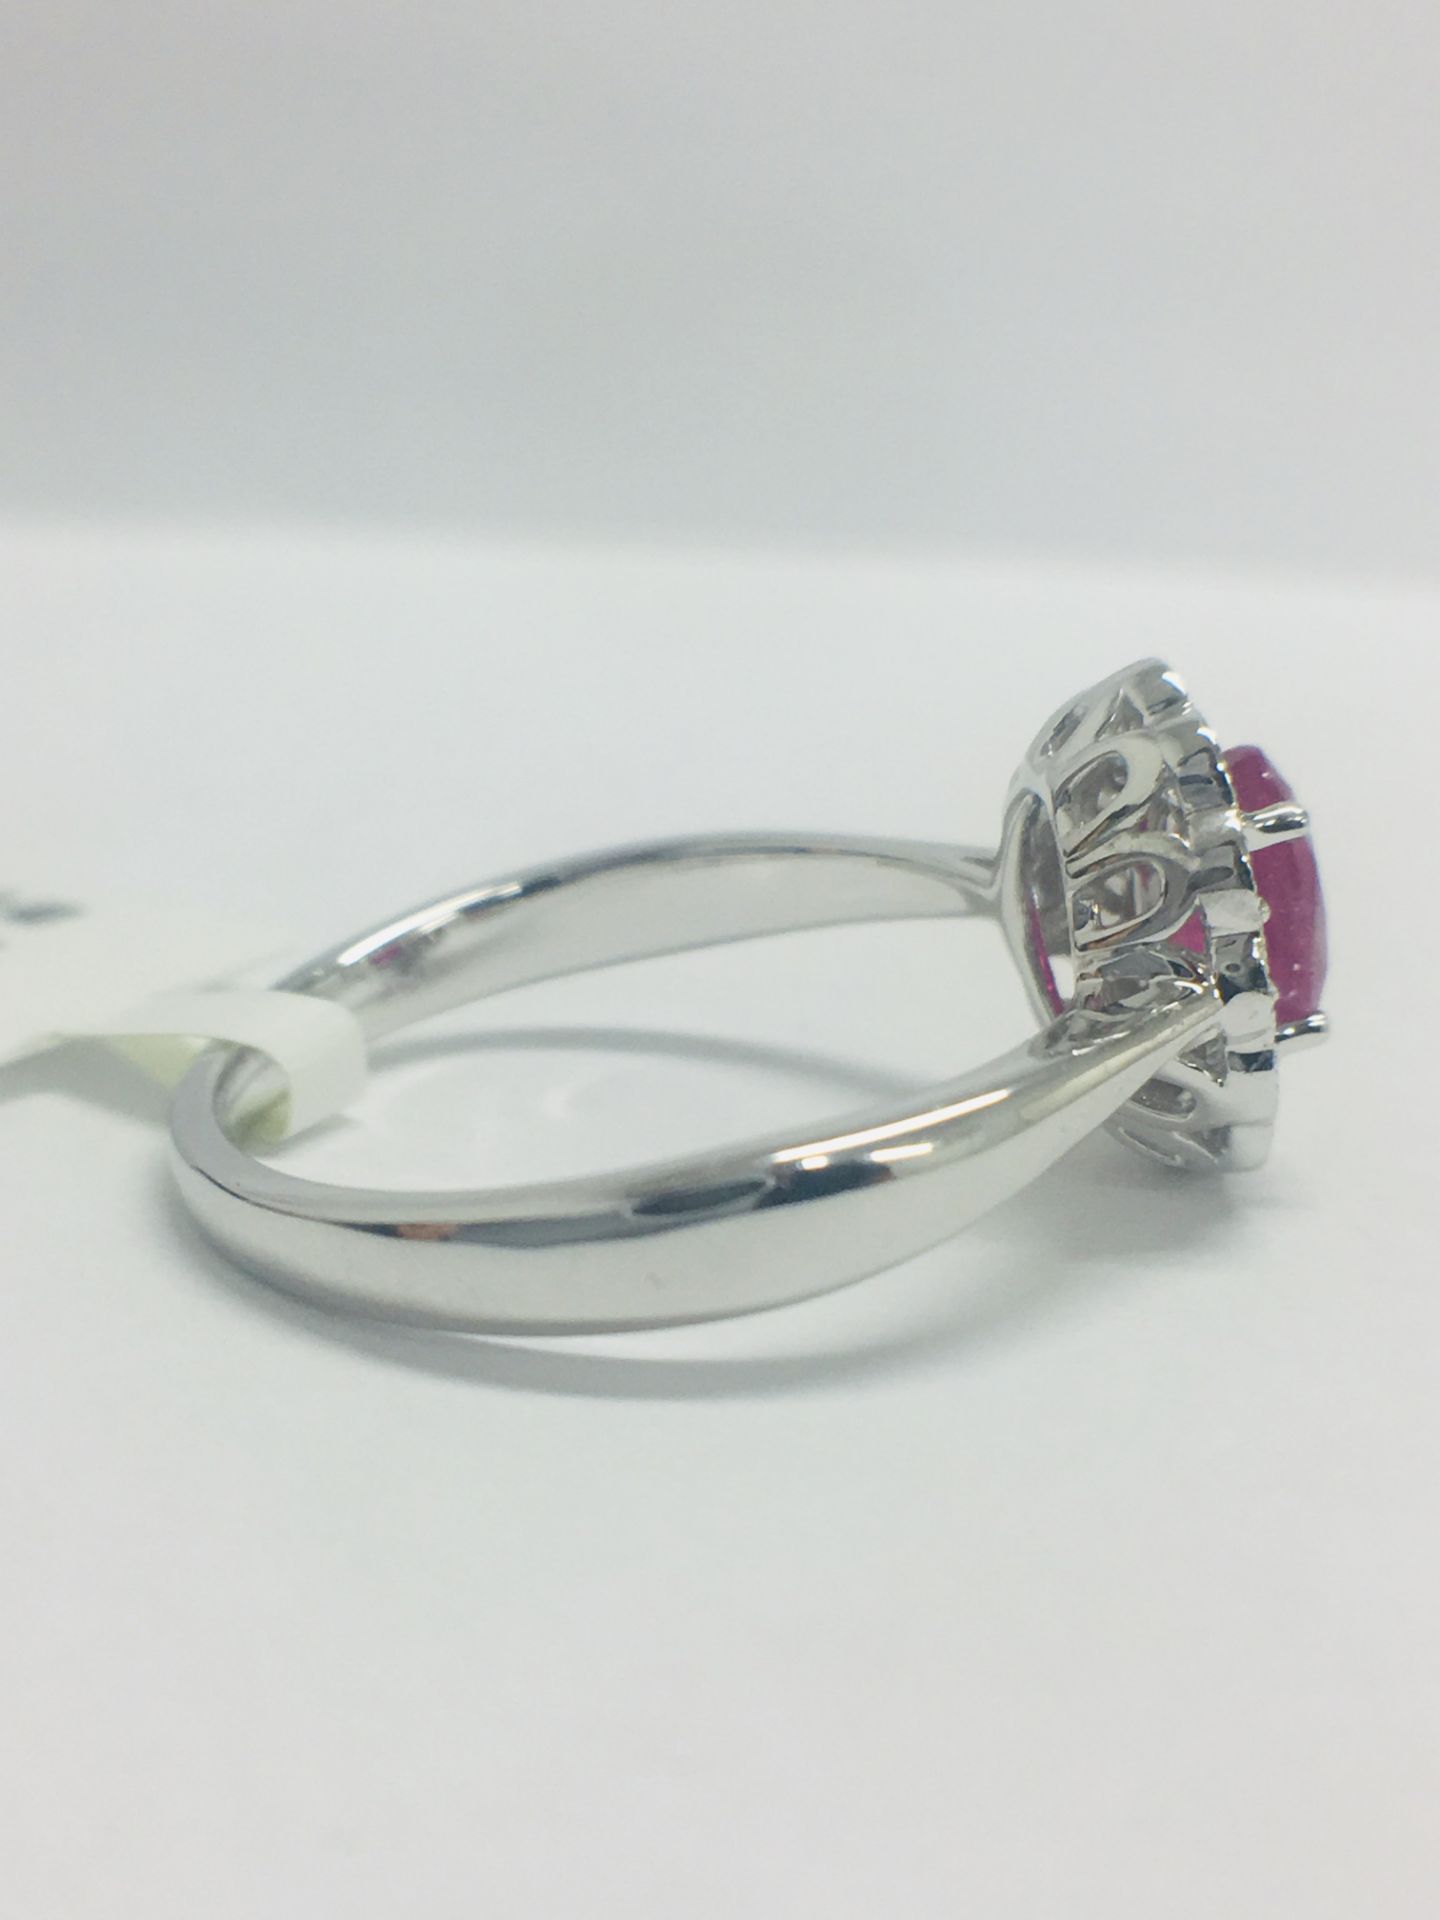 18ct White Gold Ruby Diamond Cluster Ring - Image 7 of 10